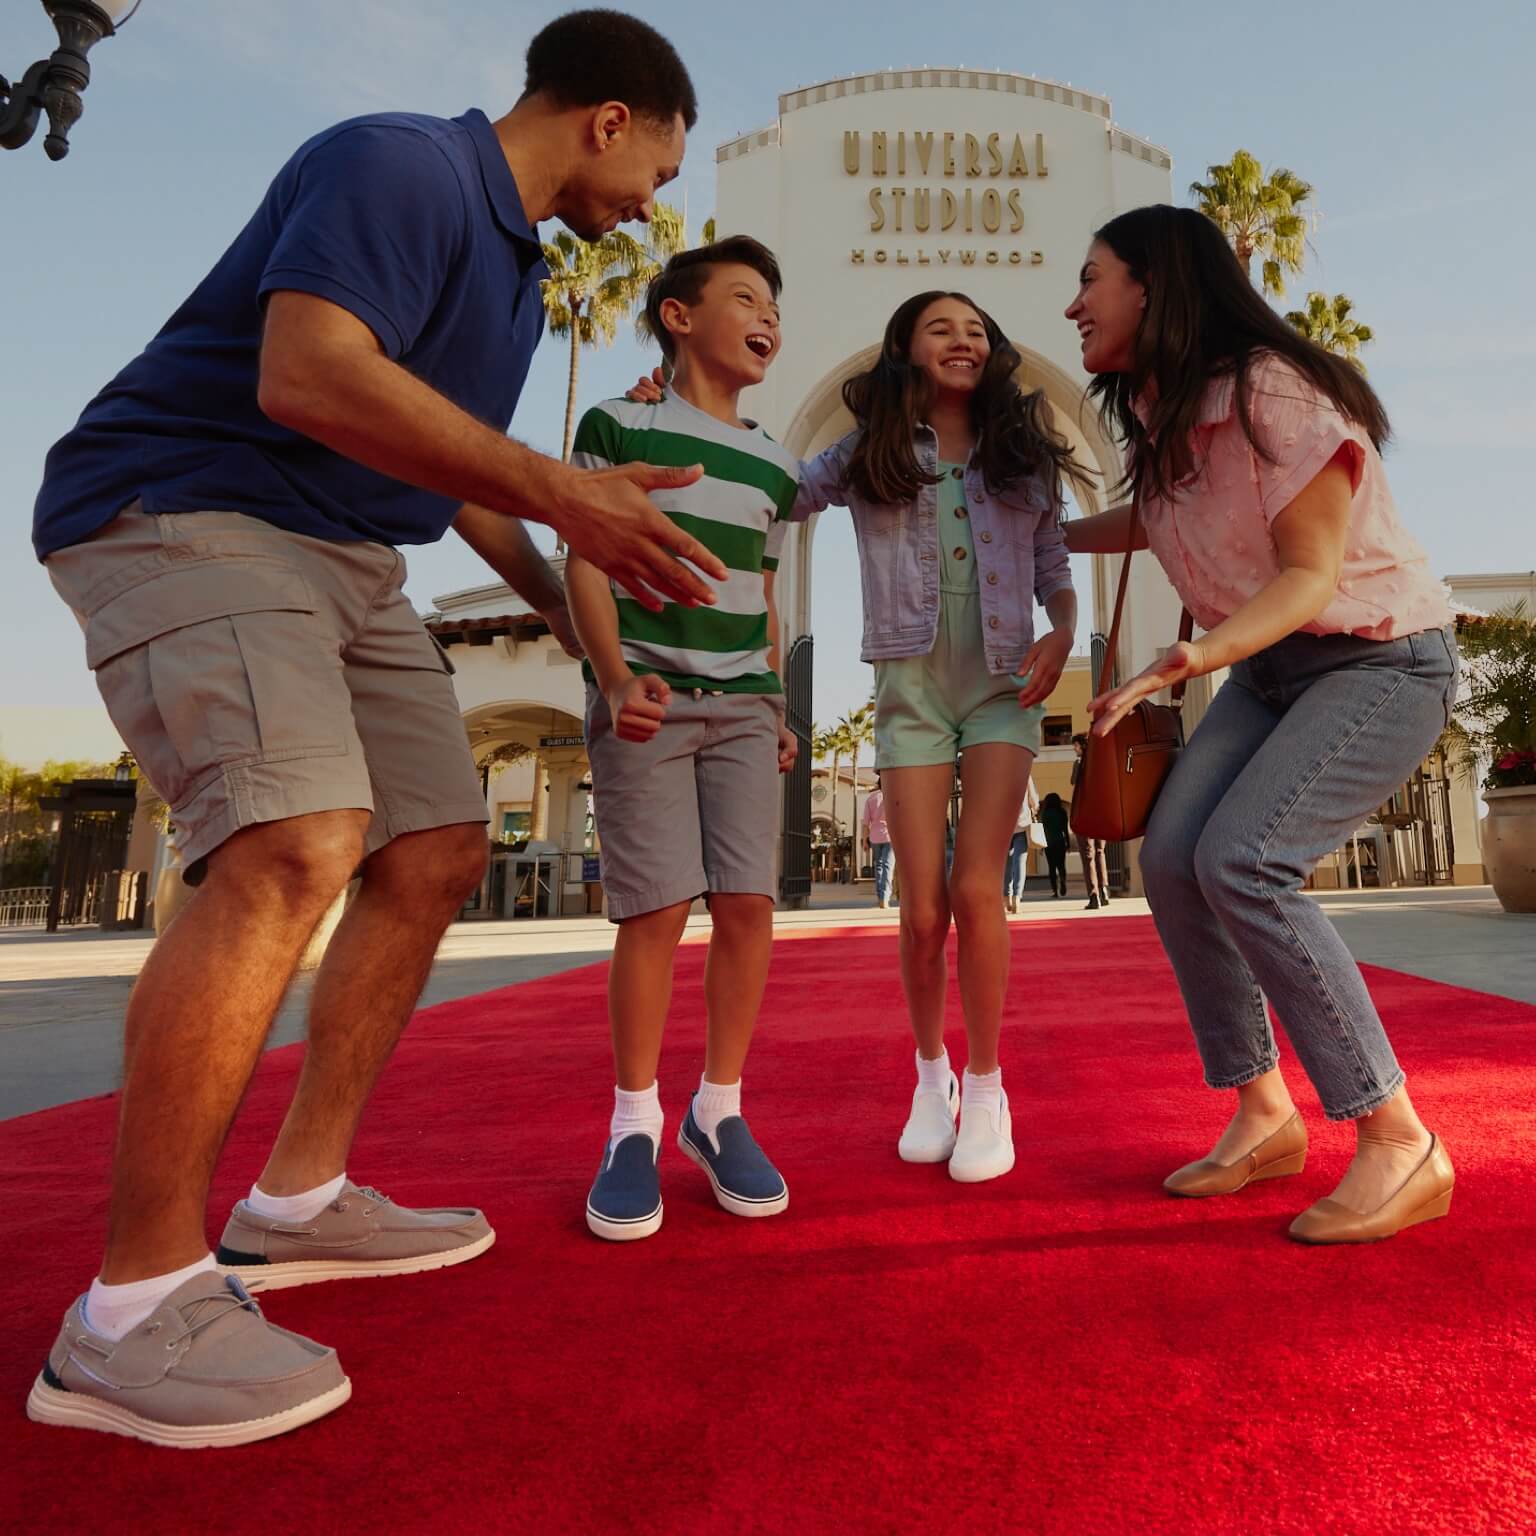 Family smiles and huddles on the red carpet in front of the Universal Studios Hollywood arch.